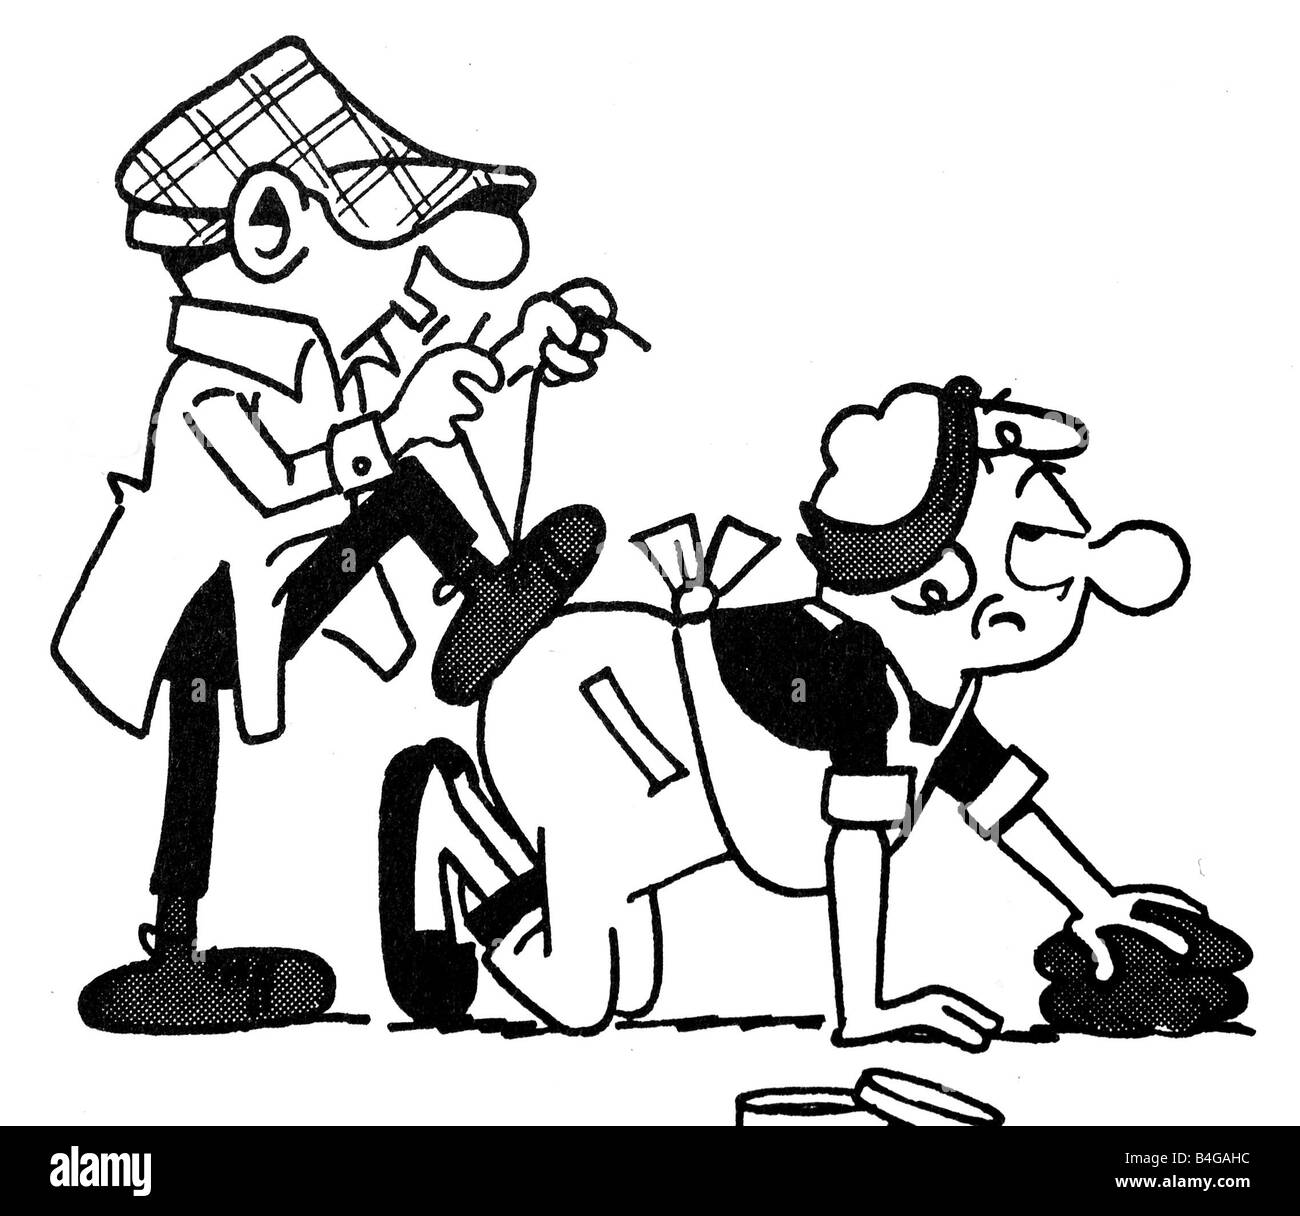 Andy Capp was created by Reg Smythe and is one of the most successful comic  strips in the world Reg Smythe was born in West Har Stock Photo - Alamy